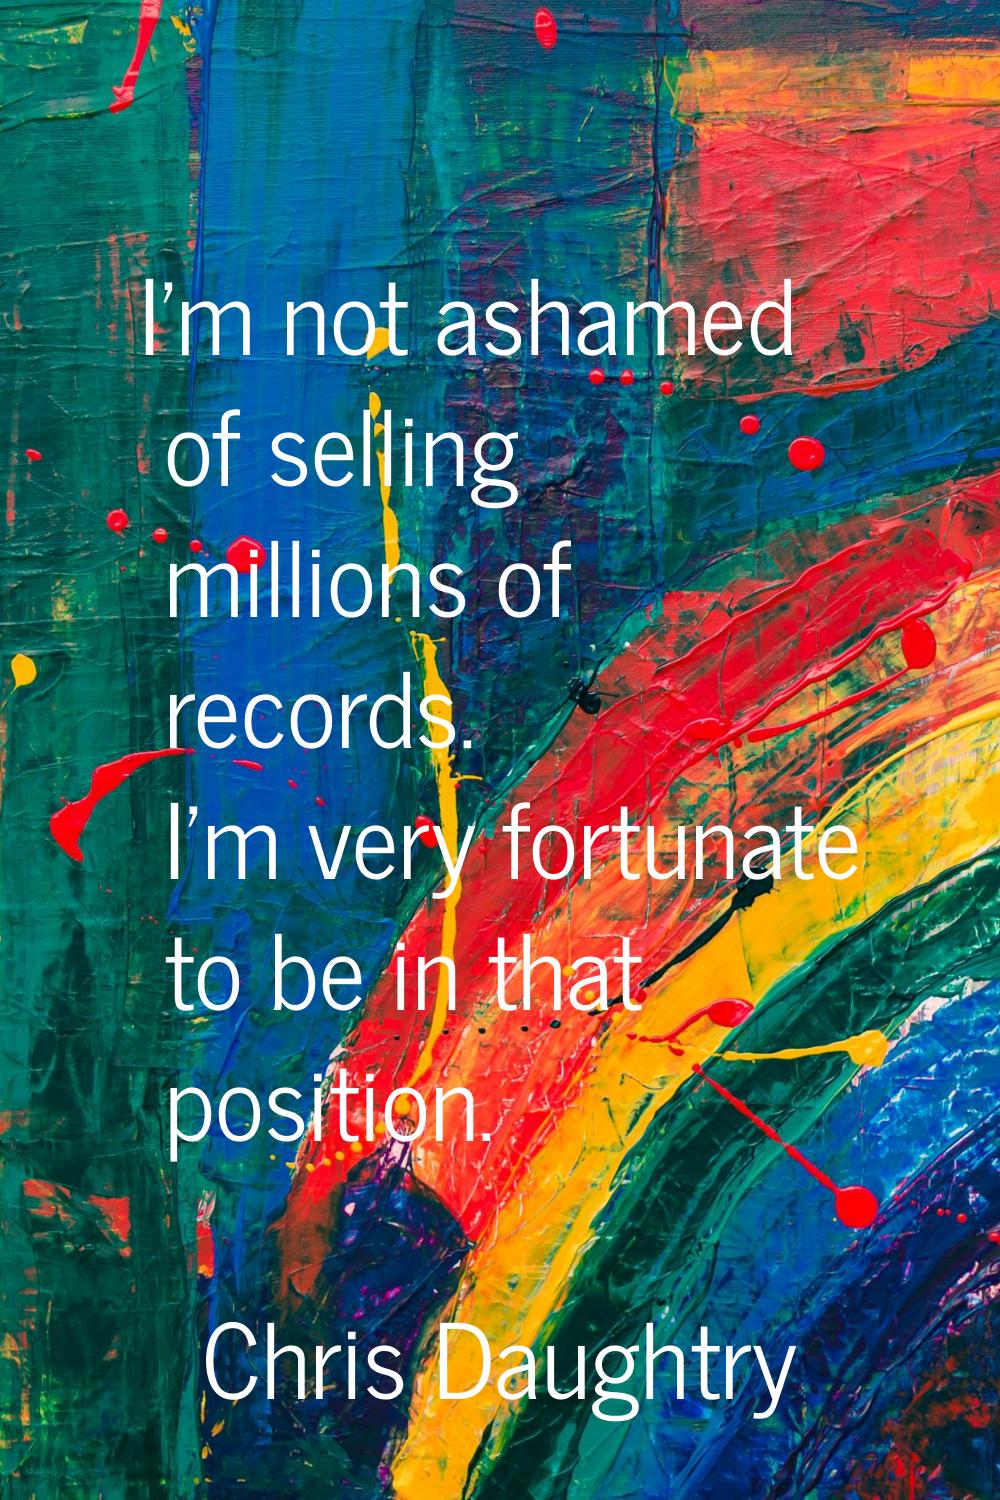 I'm not ashamed of selling millions of records. I'm very fortunate to be in that position.